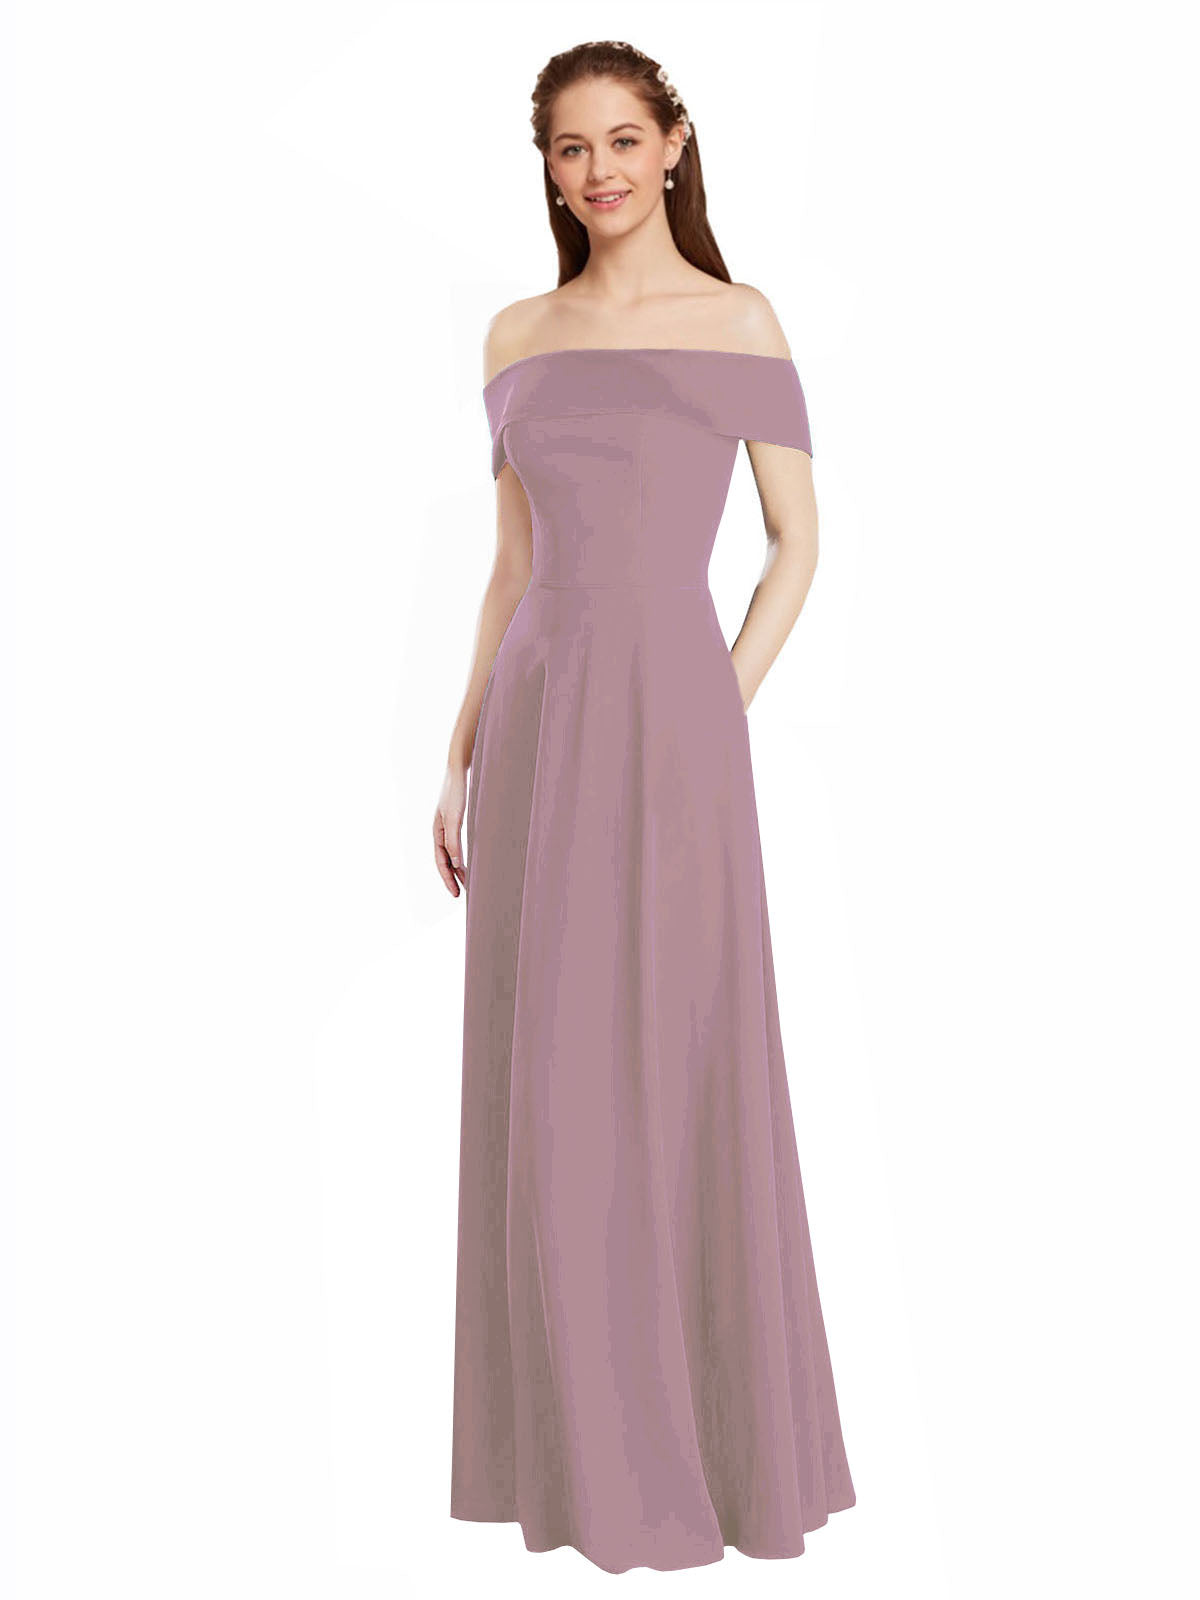 Dusty Rose A-Line Off the Shoulder Cap Sleeves Long Bridesmaid Dress Lina